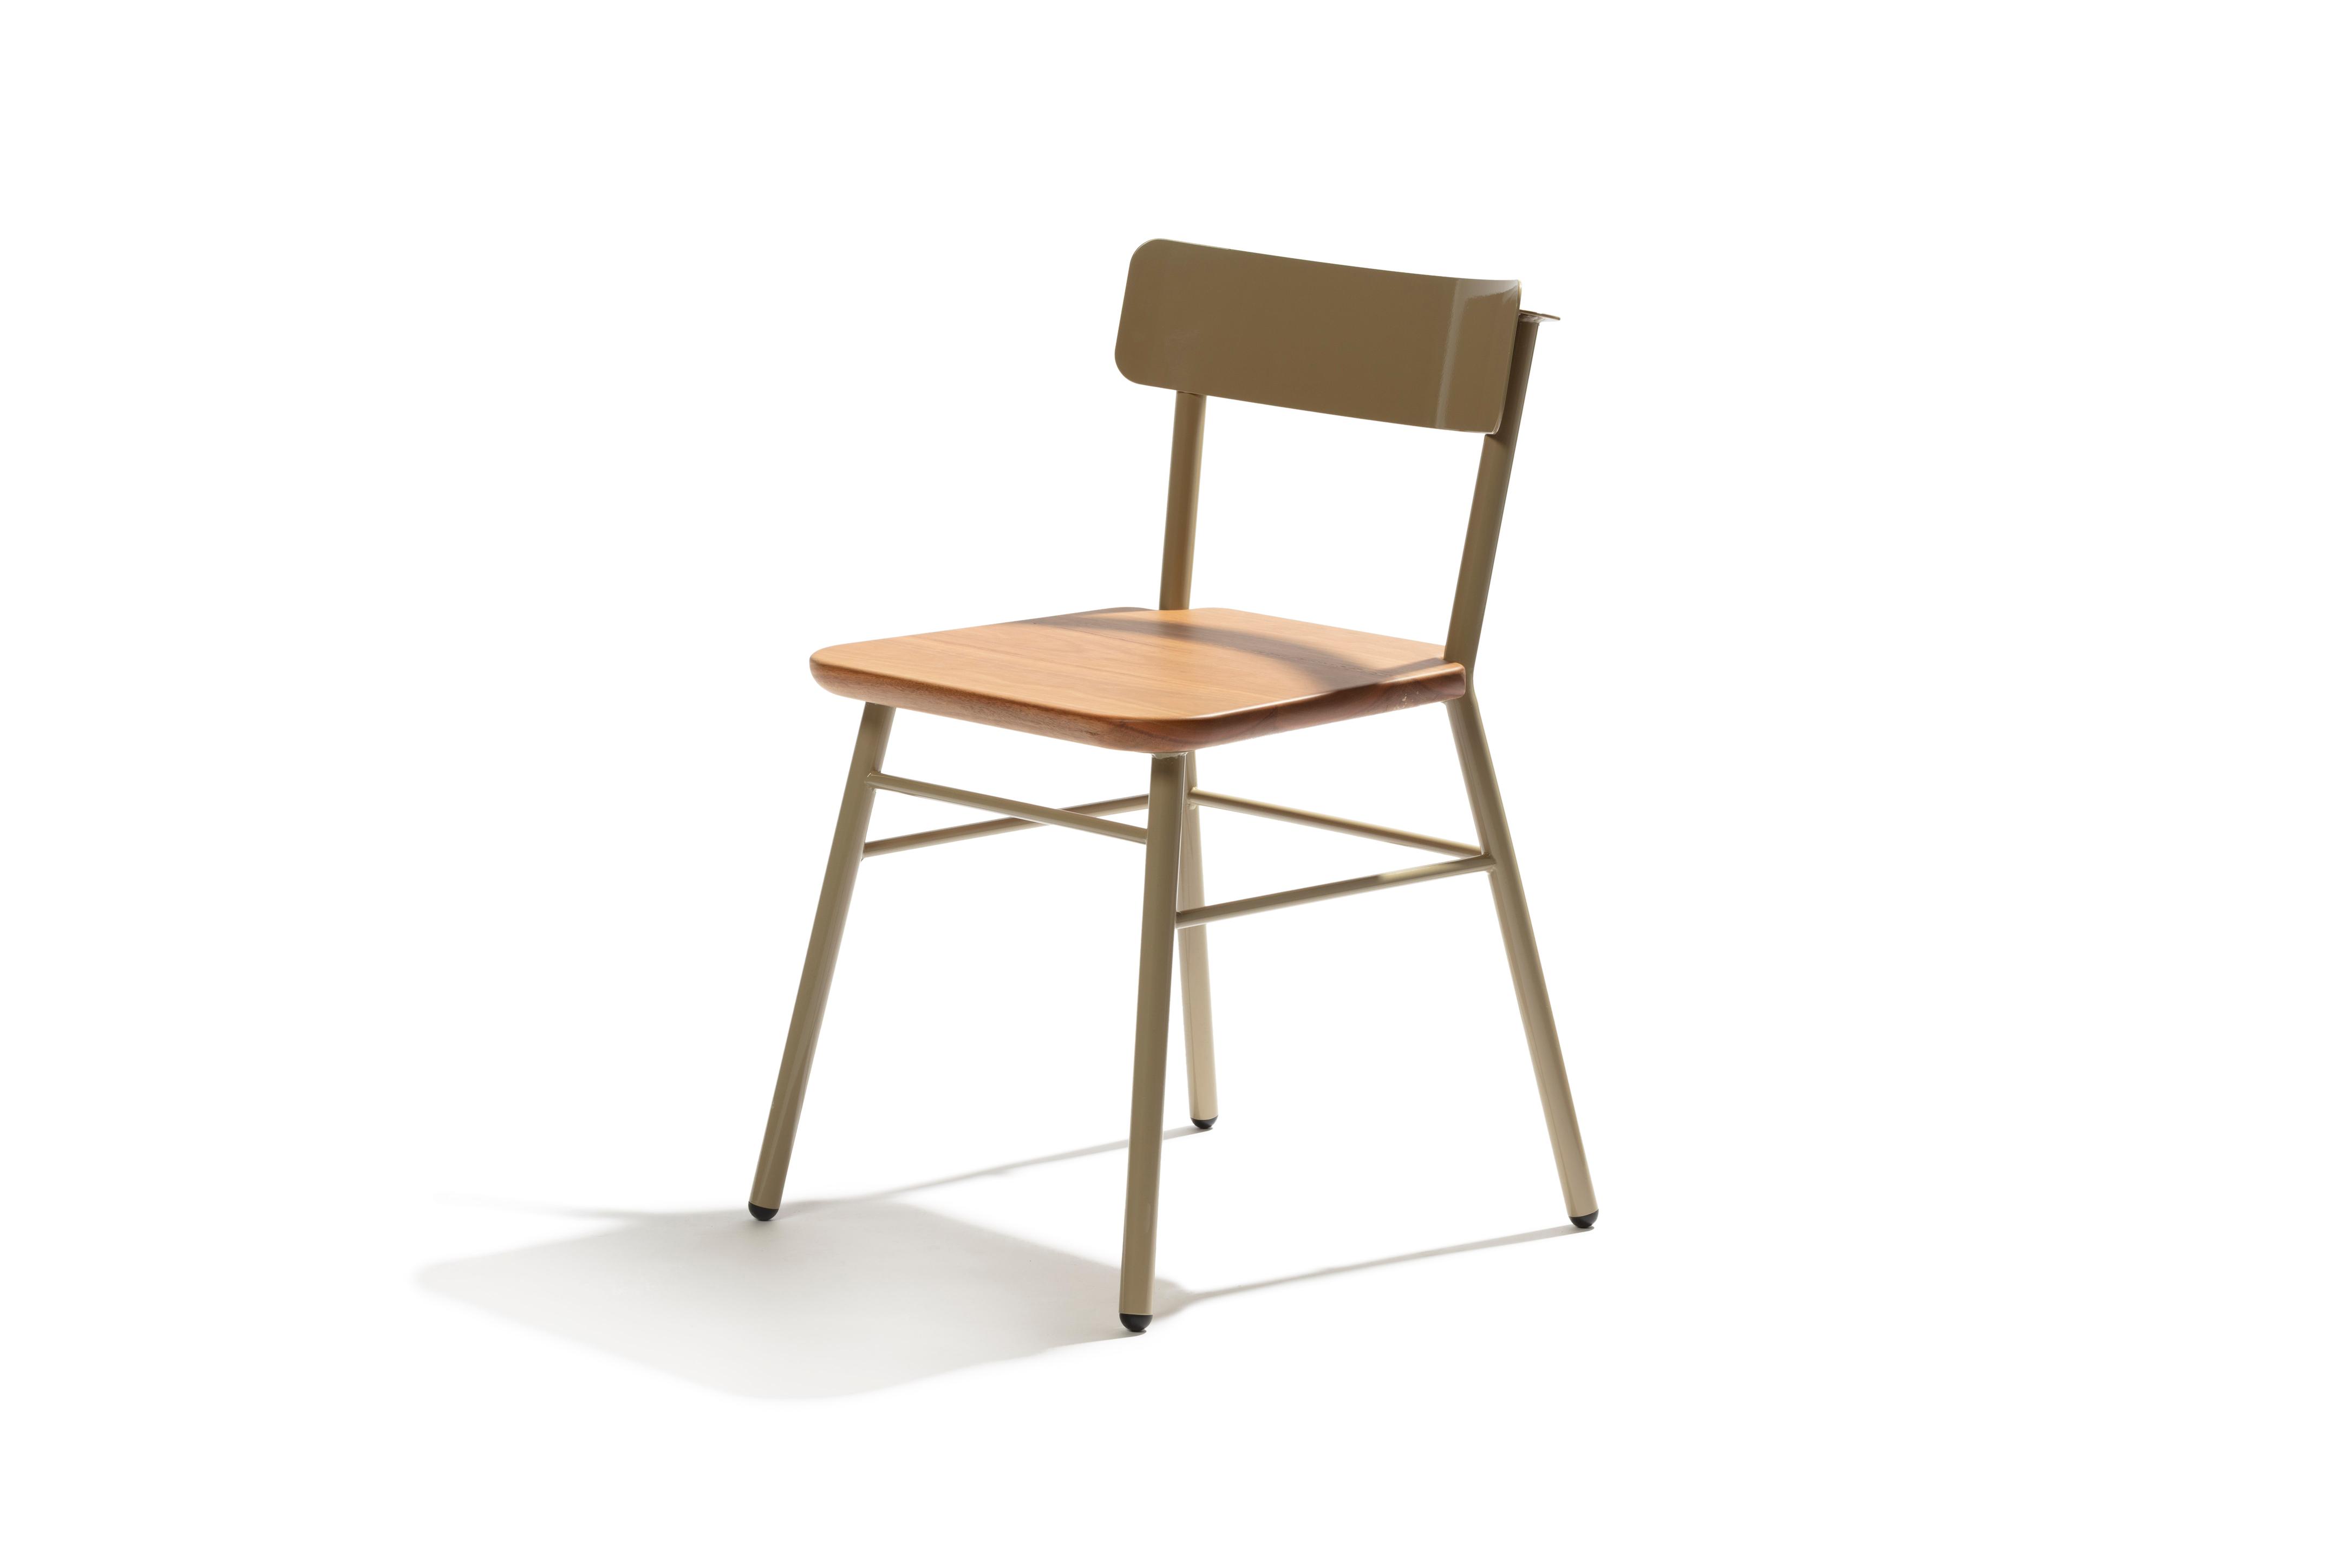 Wooden seat, on a metal frame chair.